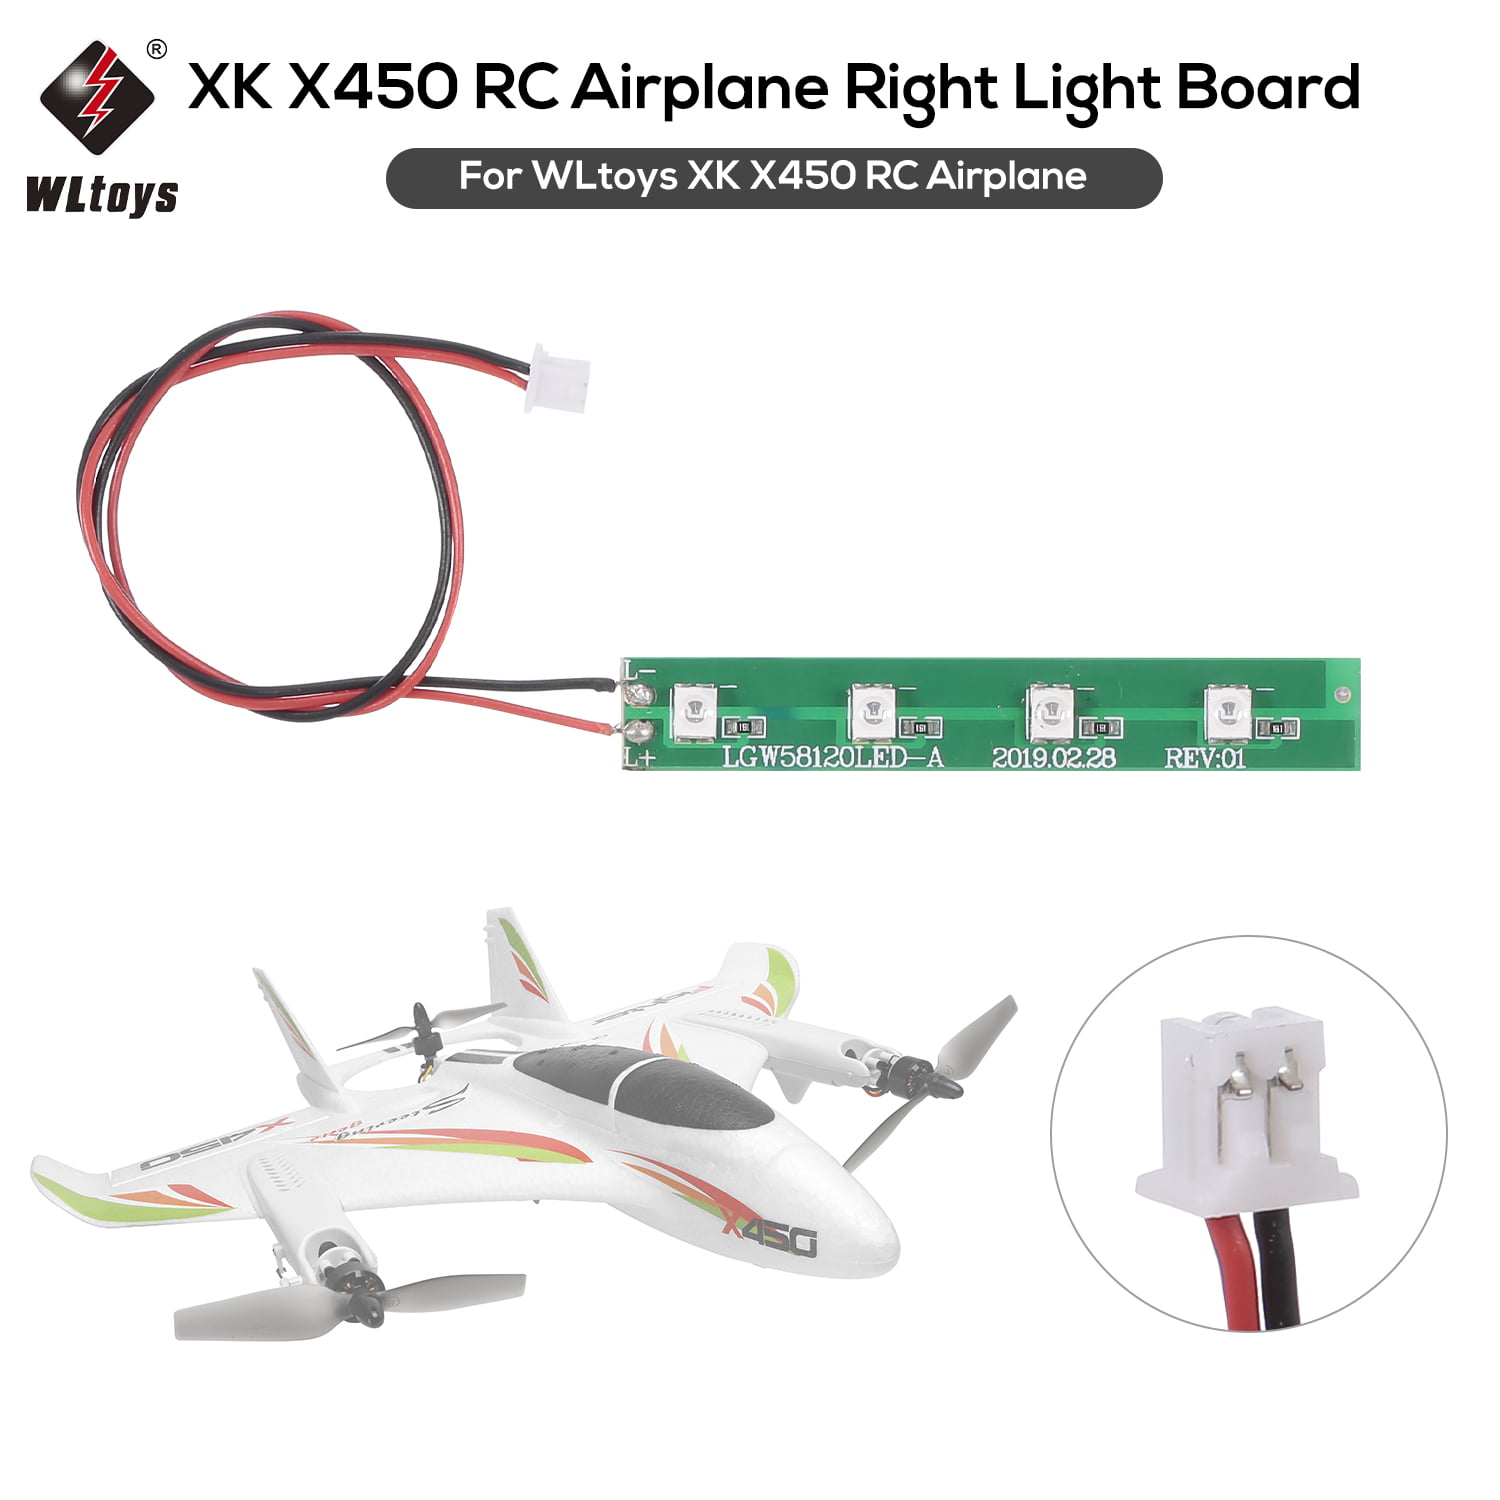 2019 Original WLtoys XK X450 RC Airplane 6CH Brushless Motor 3D/6G Fixed-wing 